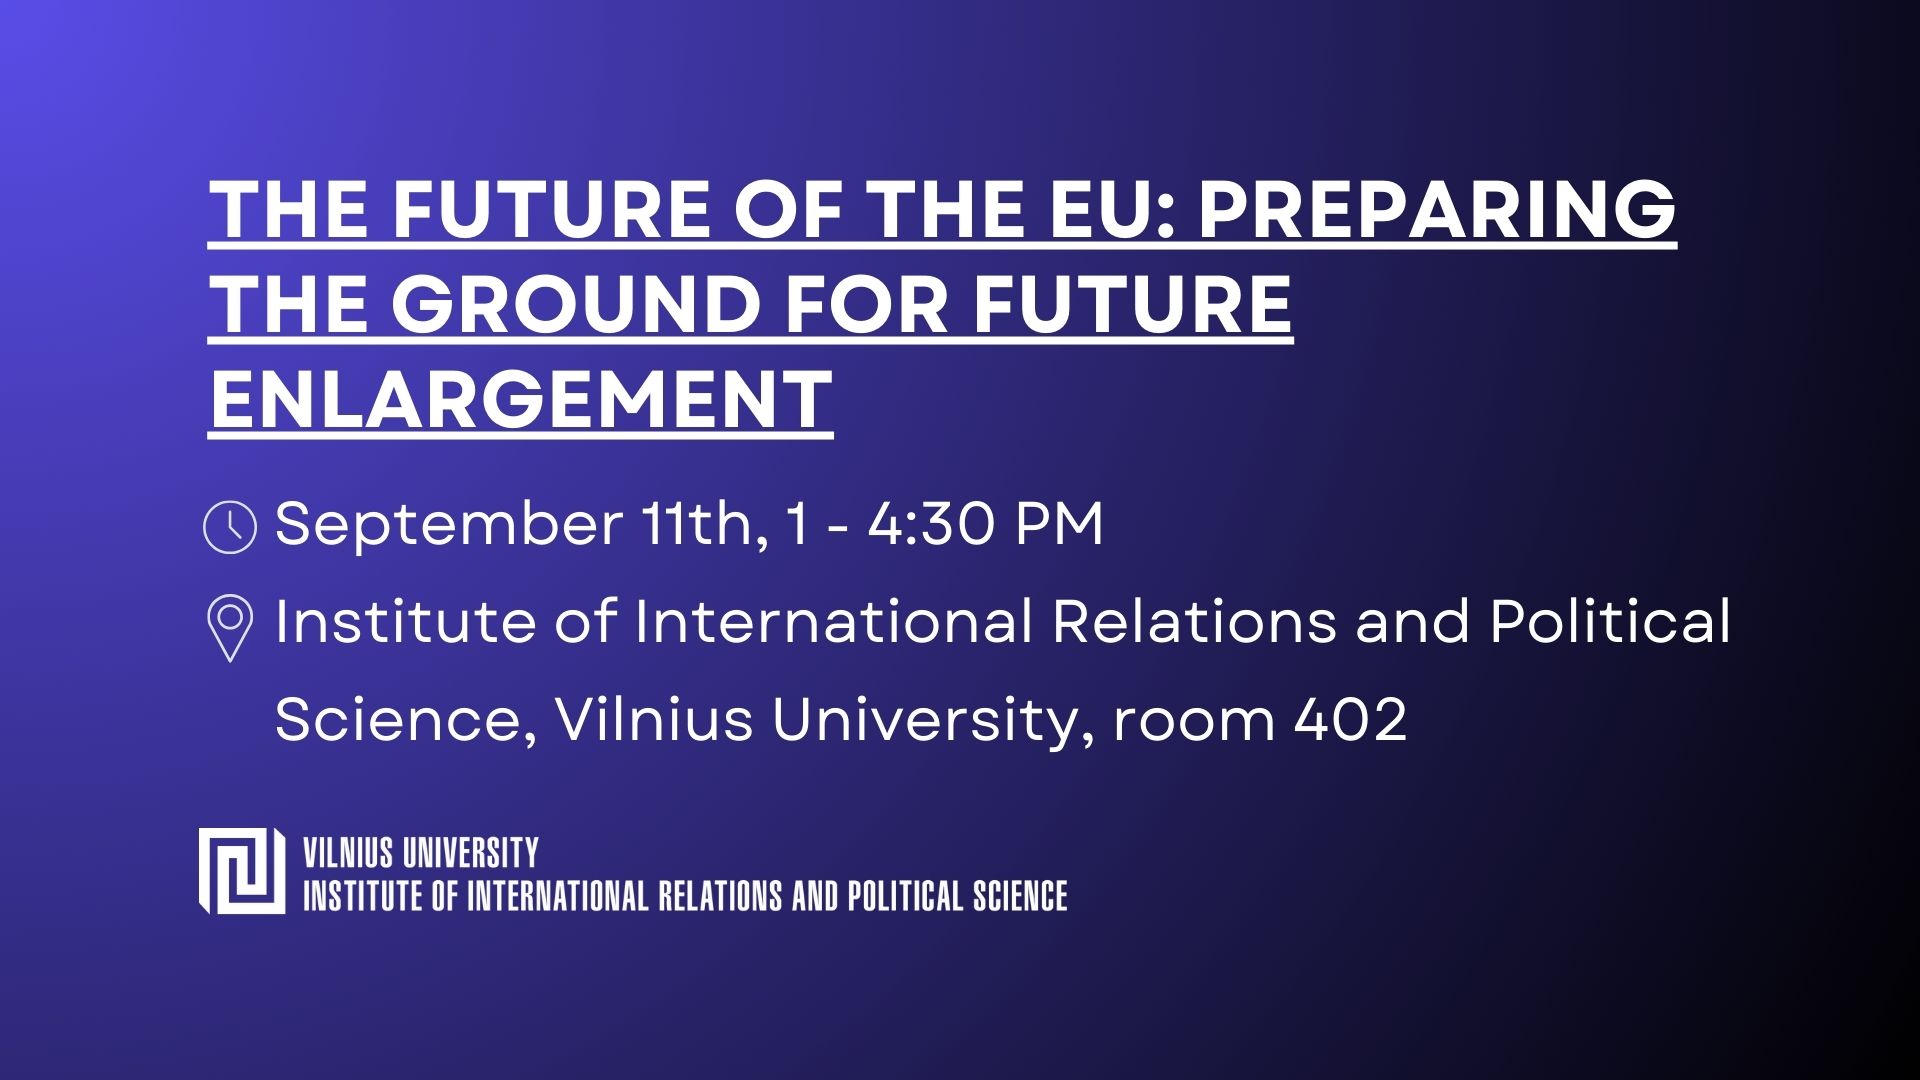 The future of the EU: preparing the ground for future enlargement